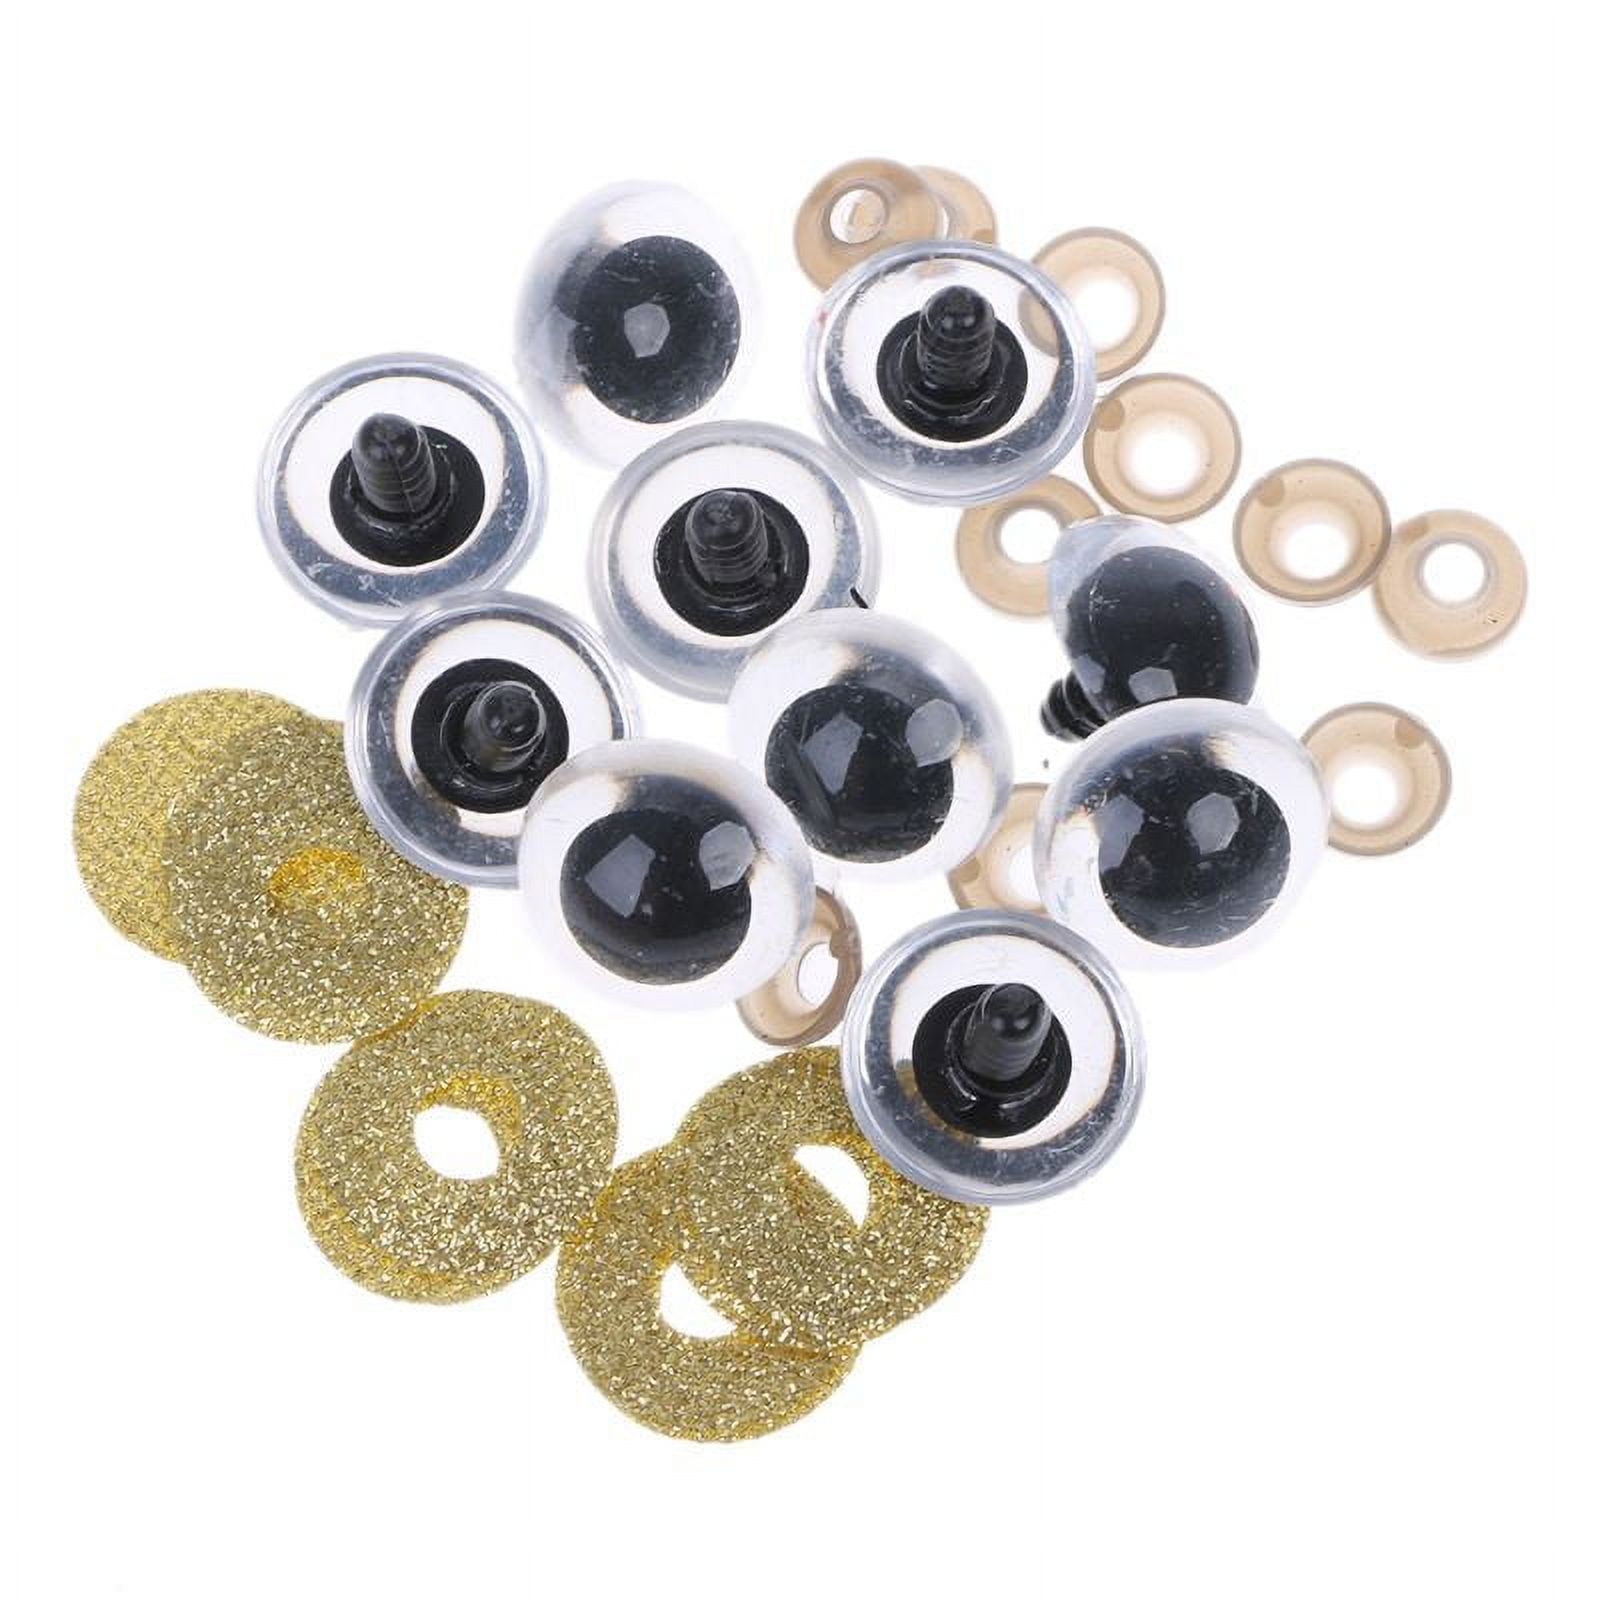  12mm Safety Eyes Plastic Eyes Plastic Craft Safety Eyes for  Cat/Stuffed Doll Animal Amigurumi DIY Accessories - 20 Pairs (Golden)